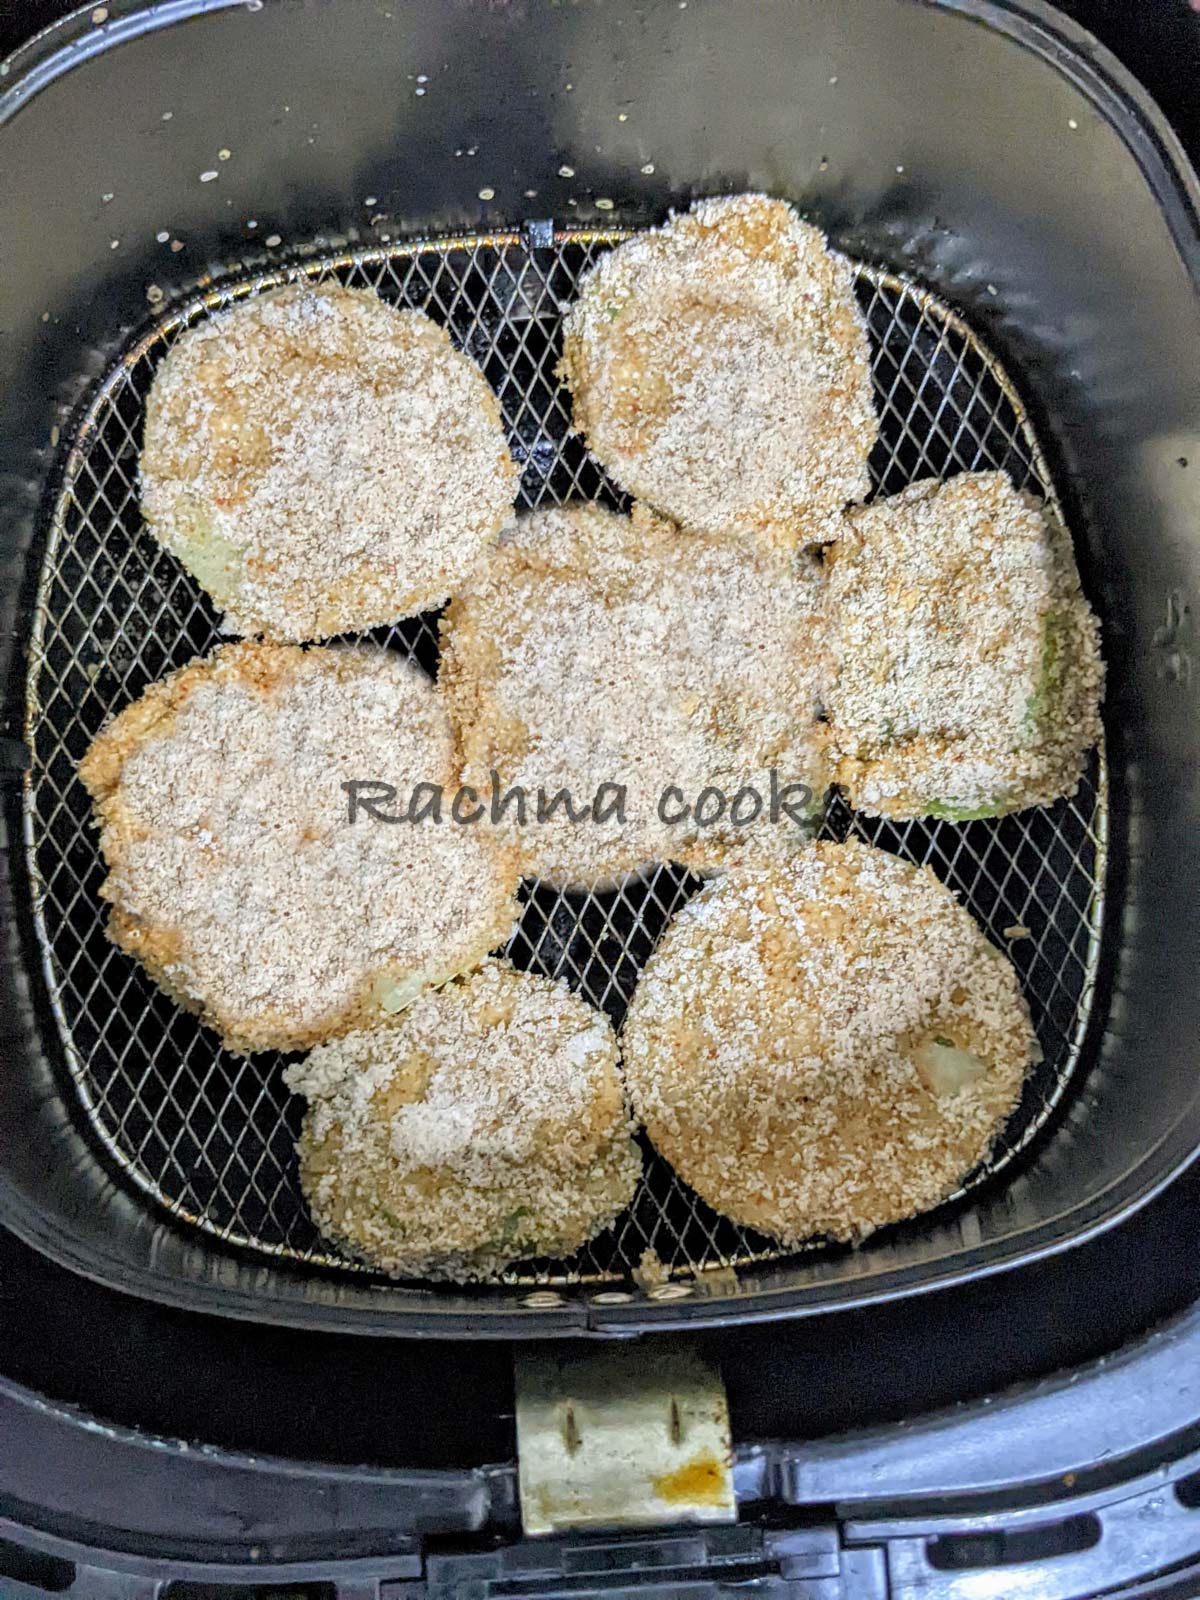 Breaded green tomato slices in air fryer basket.